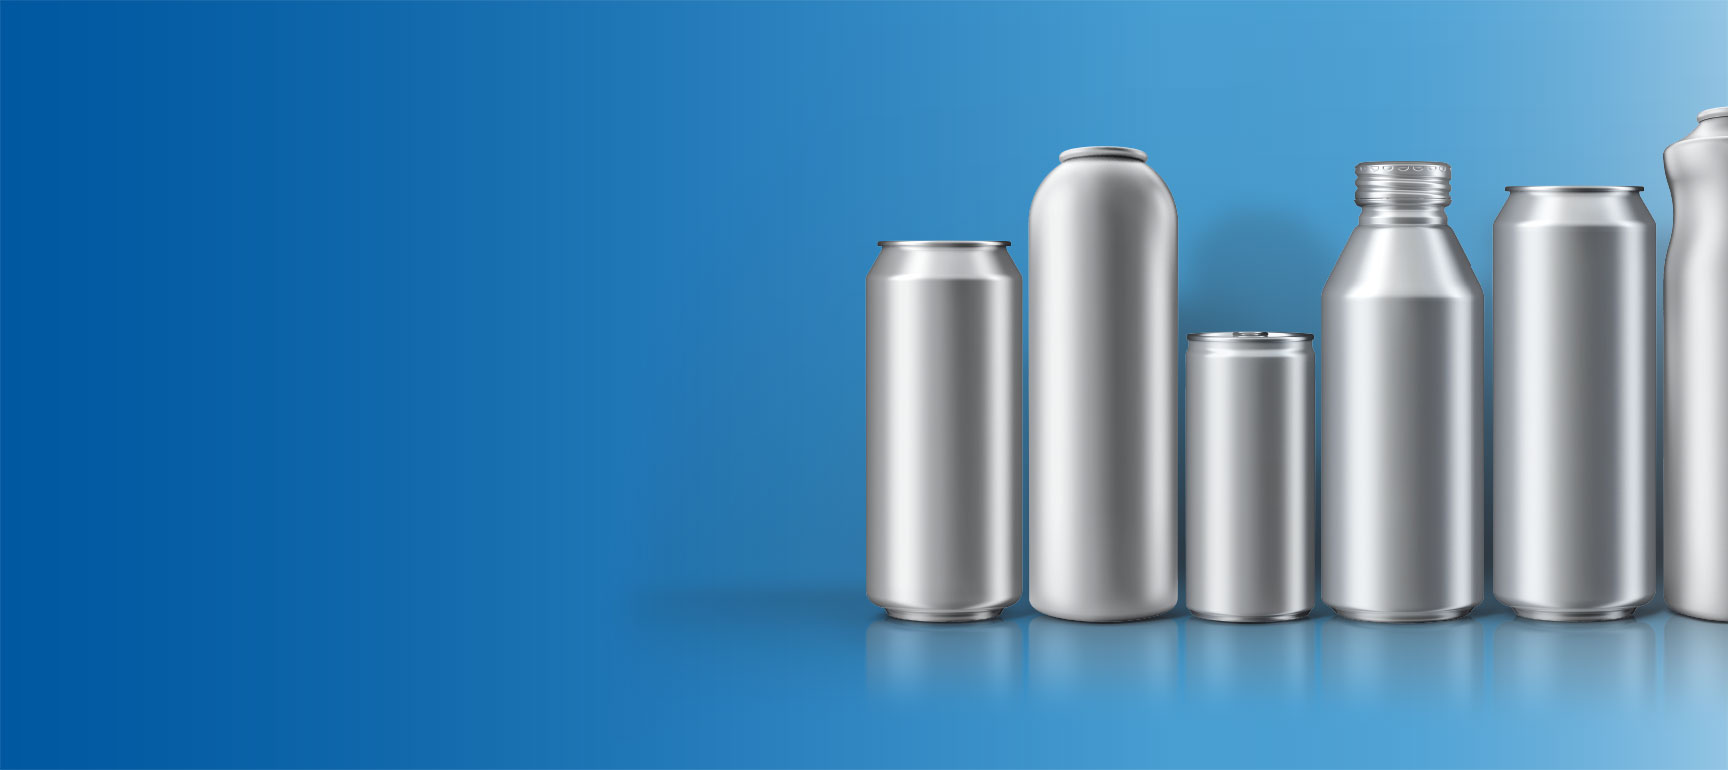 Aluminum Cans and Bottles with Gradient